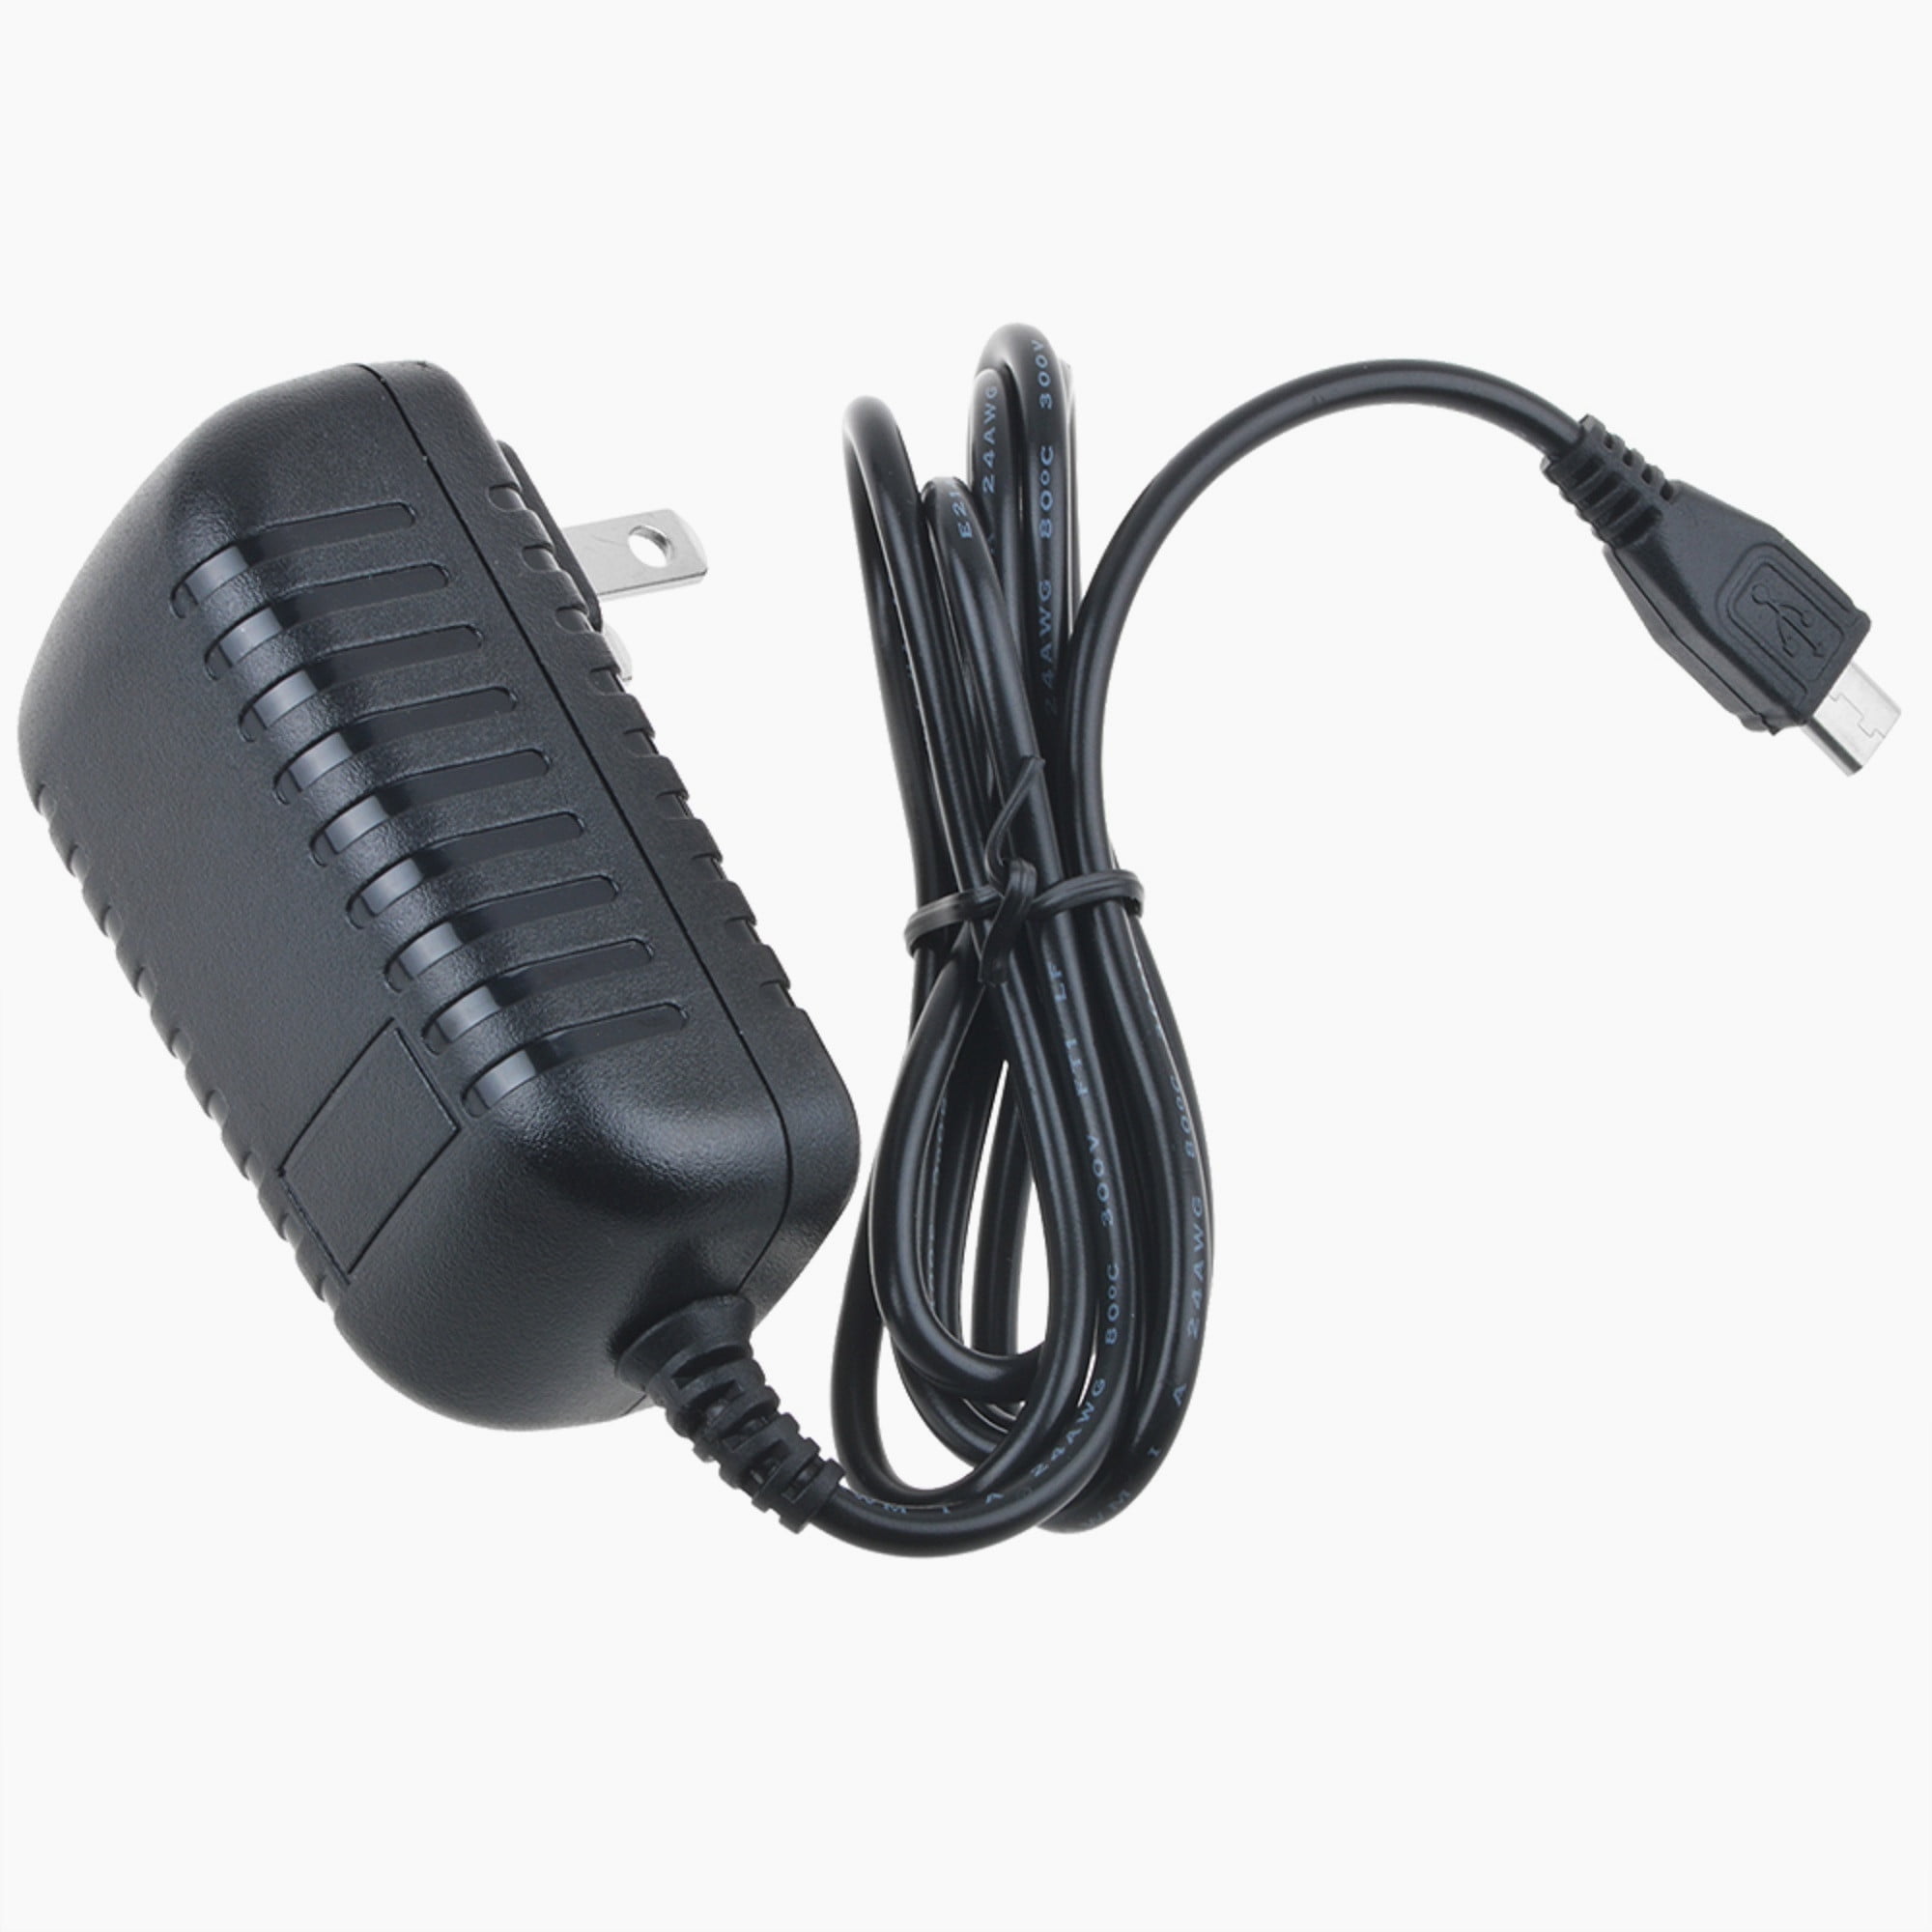 Wall AC Home Charger for Samsung Galaxy Tab 4 SM-T330 T330NU Tablet Car 